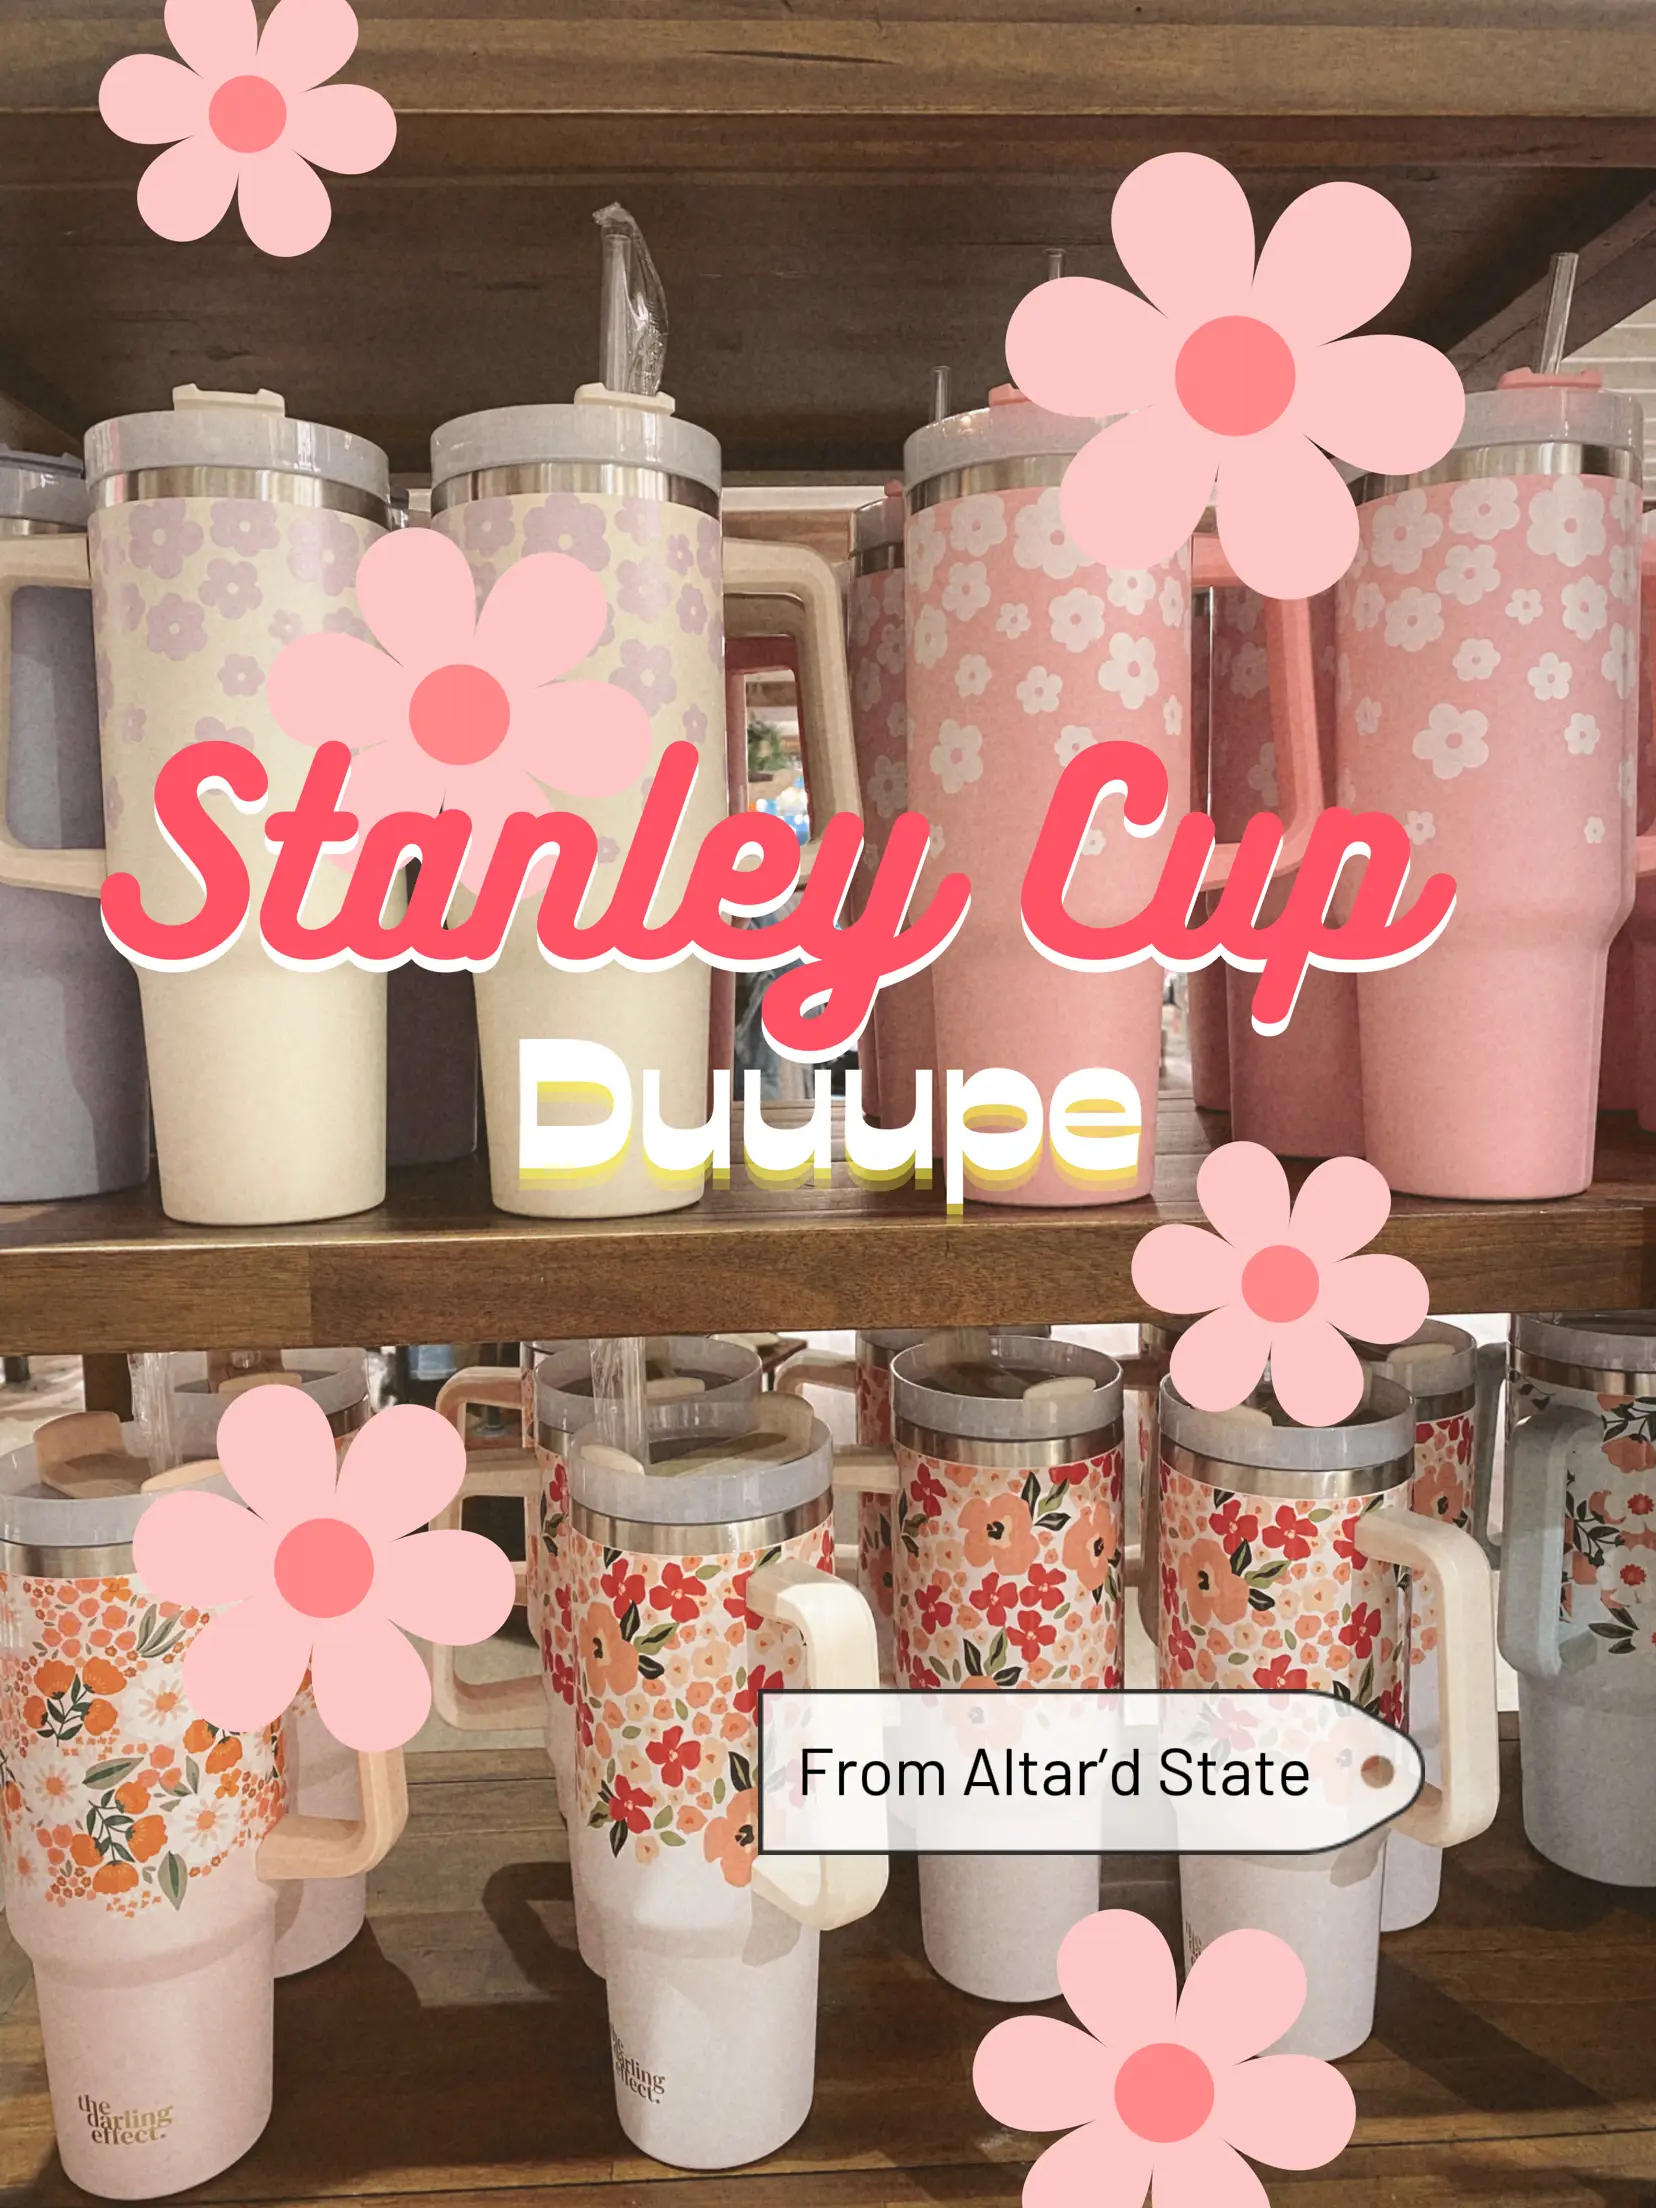 Stanley Cup DUPES, Gallery posted by Molly